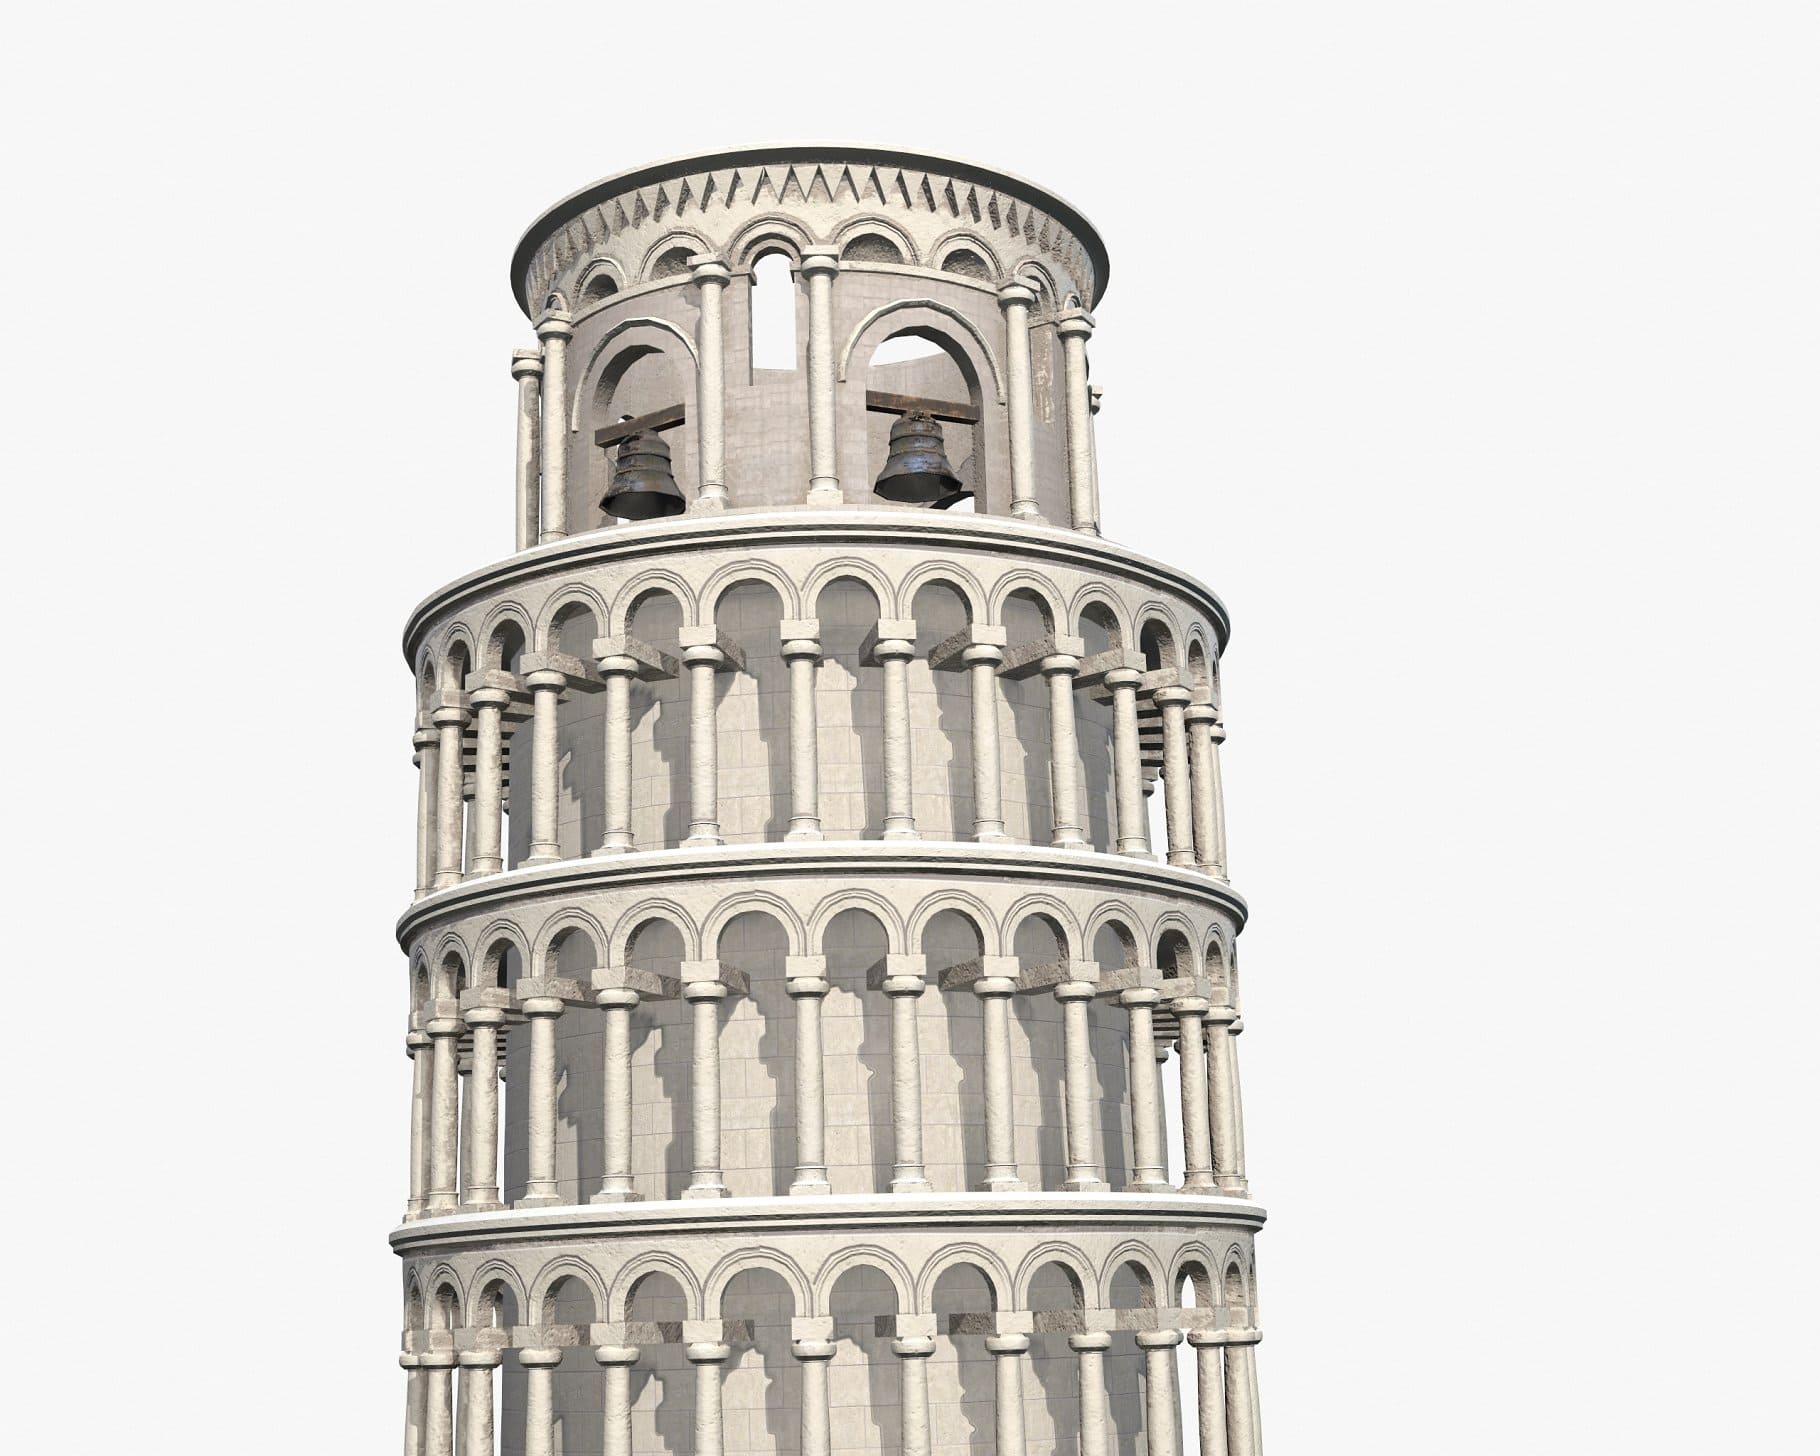 The 3D model shows the upper floors of the Leaning Tower of Pisa.